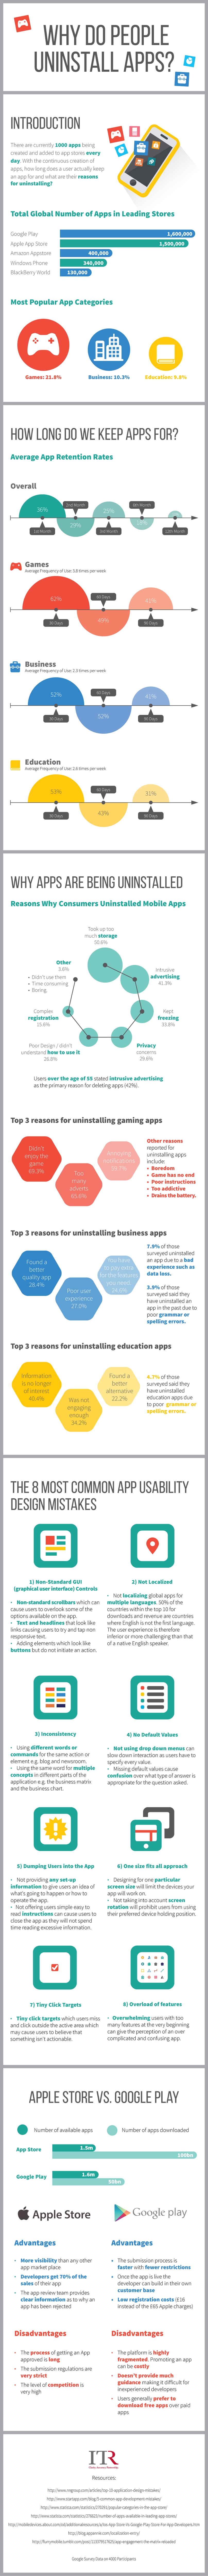 Why Do People Uninstall Apps? infogrphic